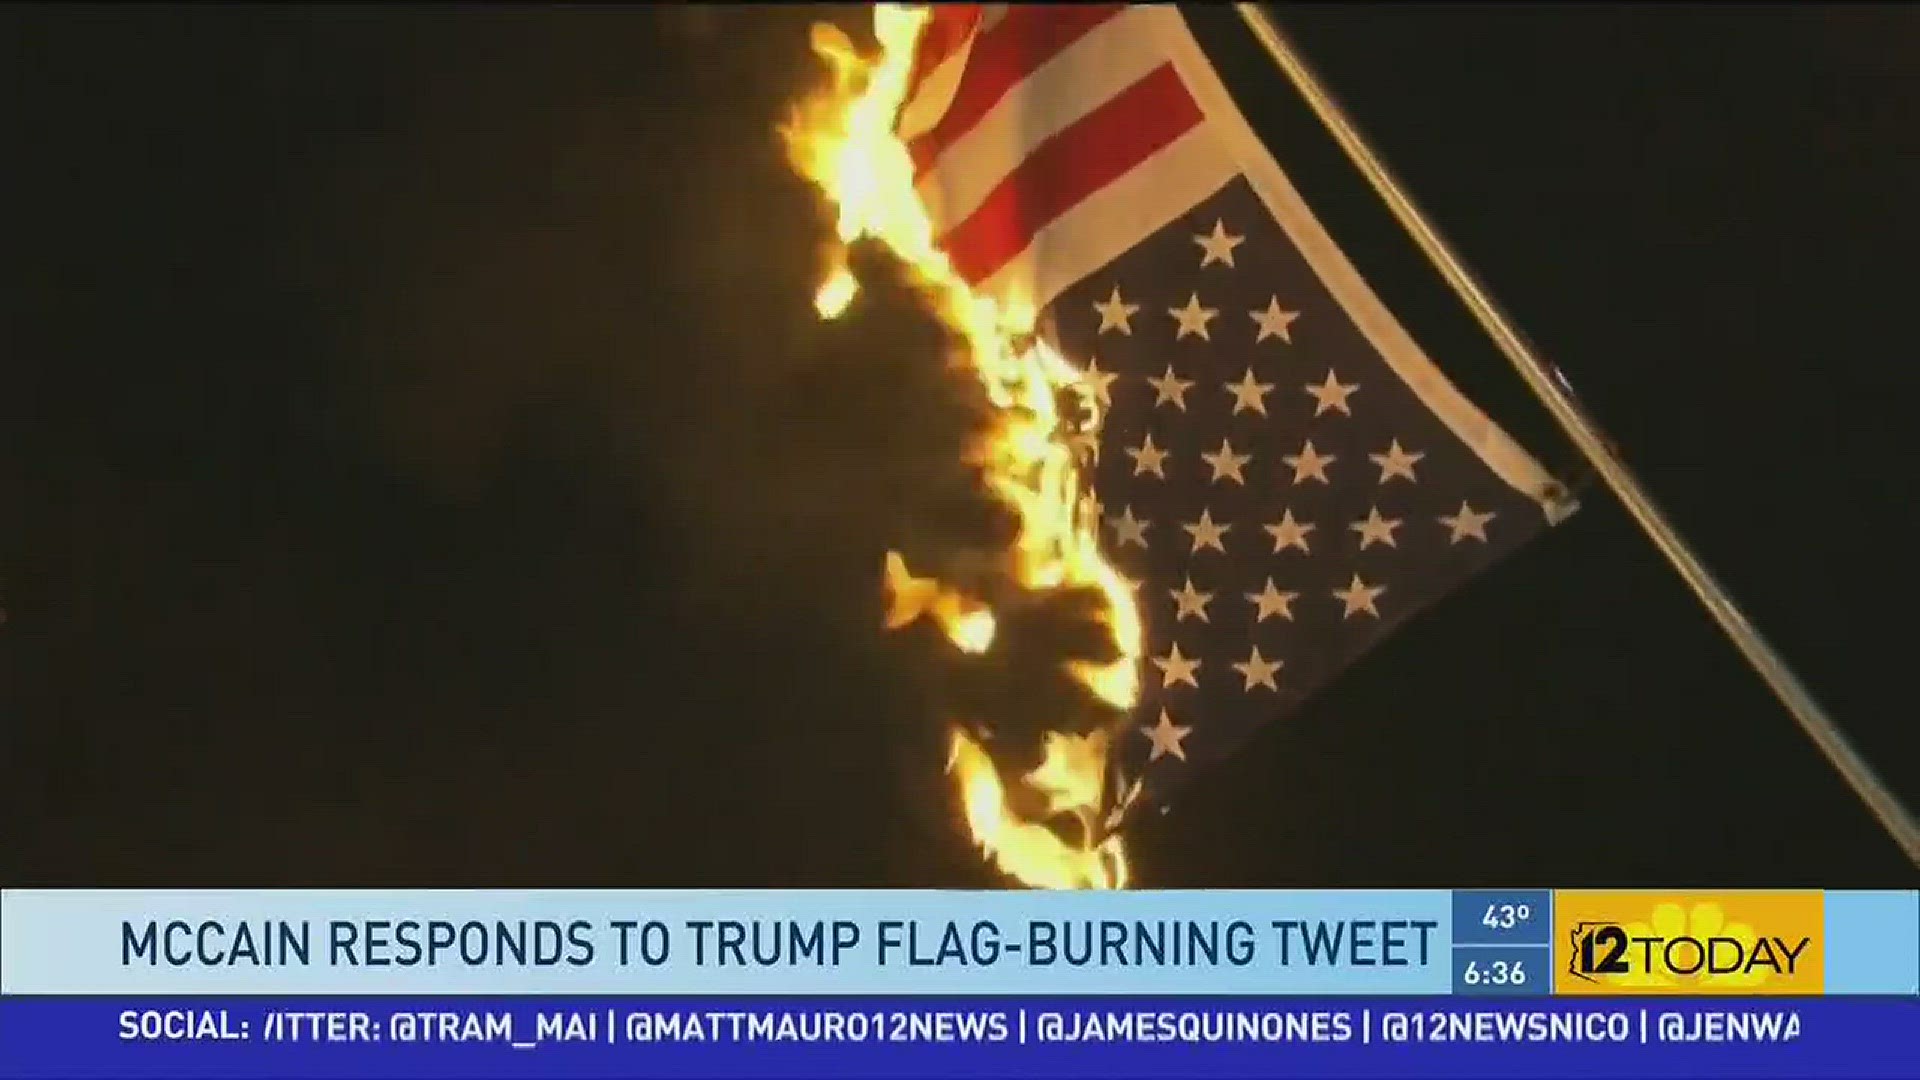 Here's what John McCain said about Donald Trump's tweet regarding punishment for burning the American flag.